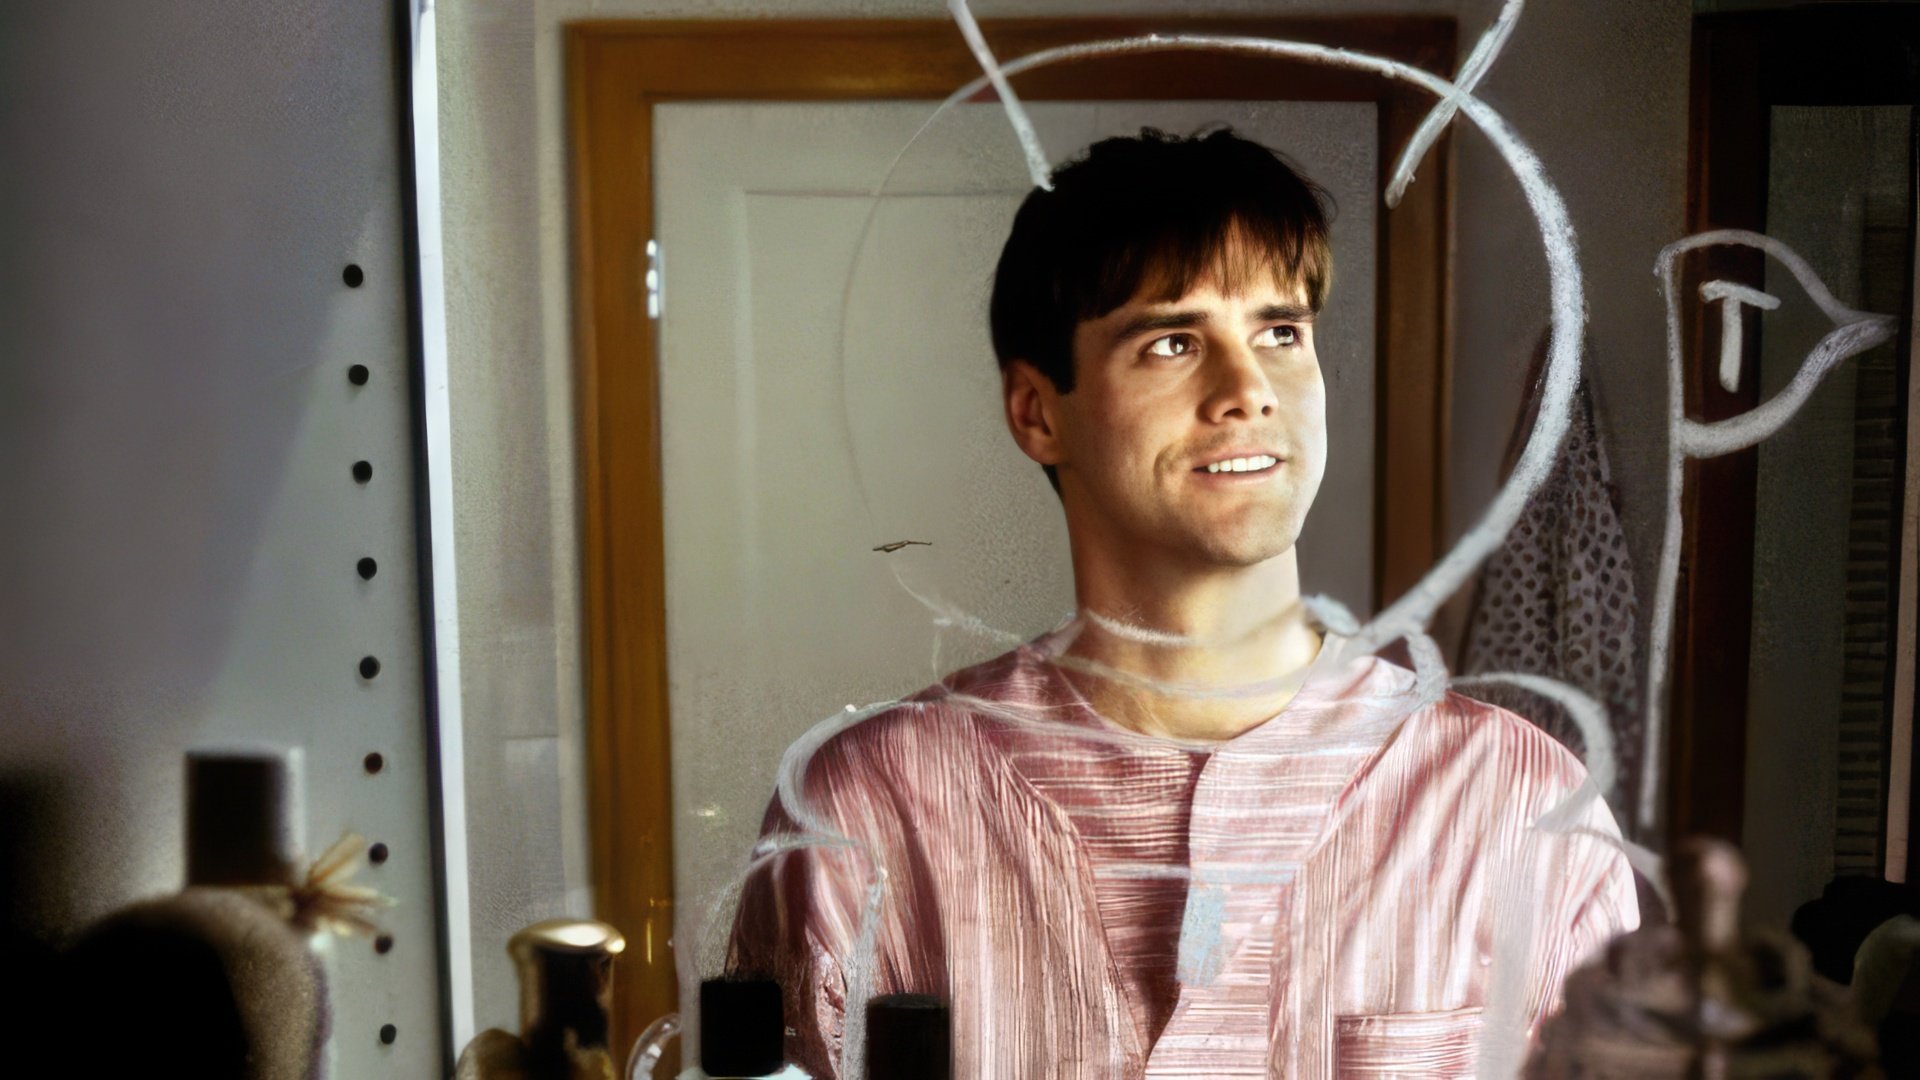 »The Truman Show» had a huge success among the audience